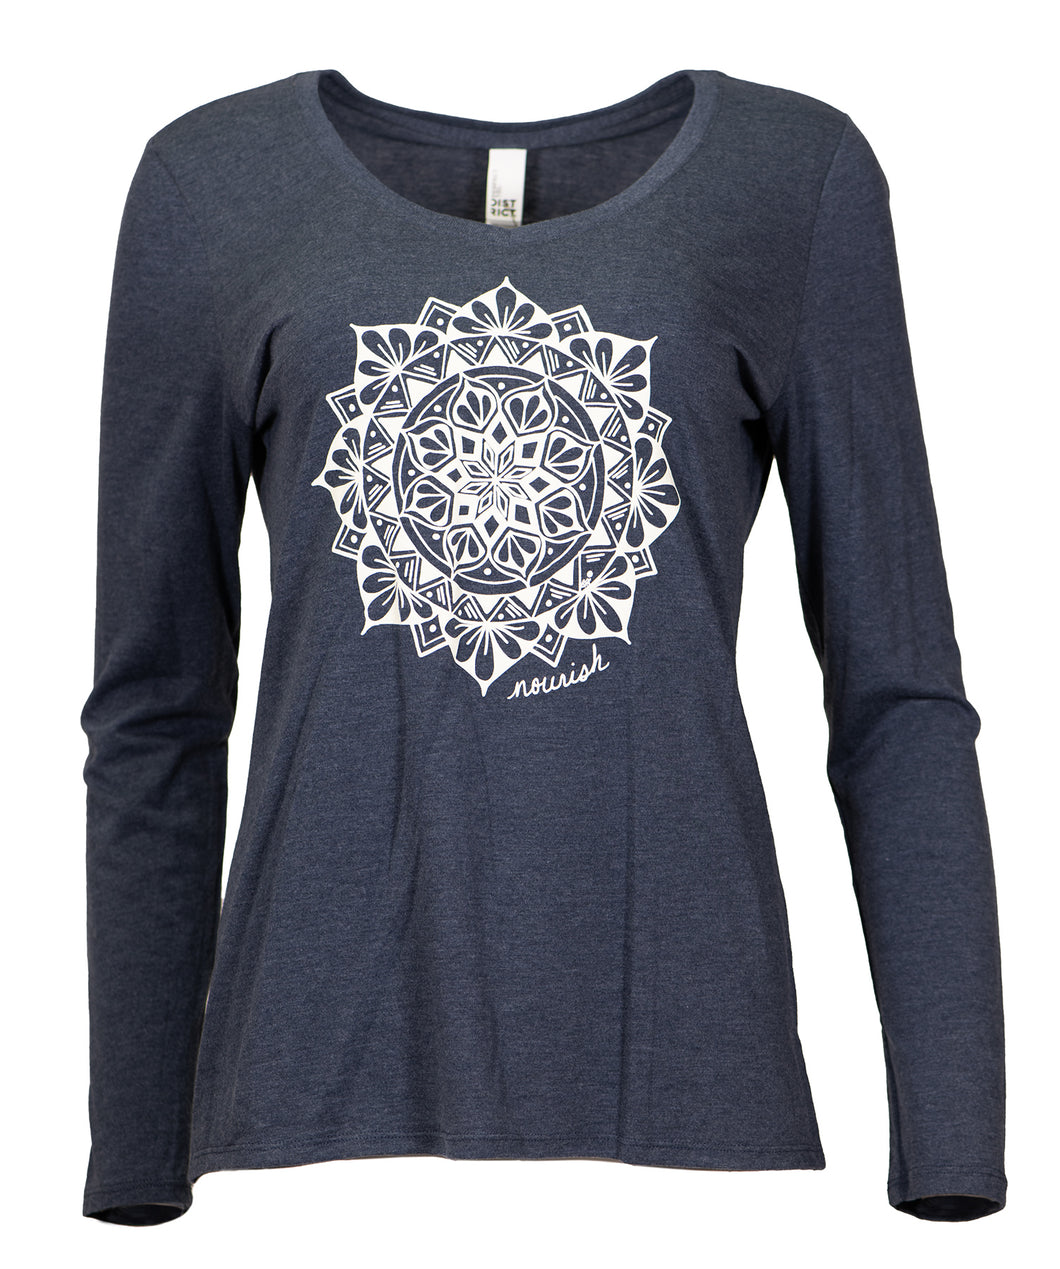 Product Image : Front View - Women's Long-sleeve V-neck Tee - Navy with a large white mandala design in the center